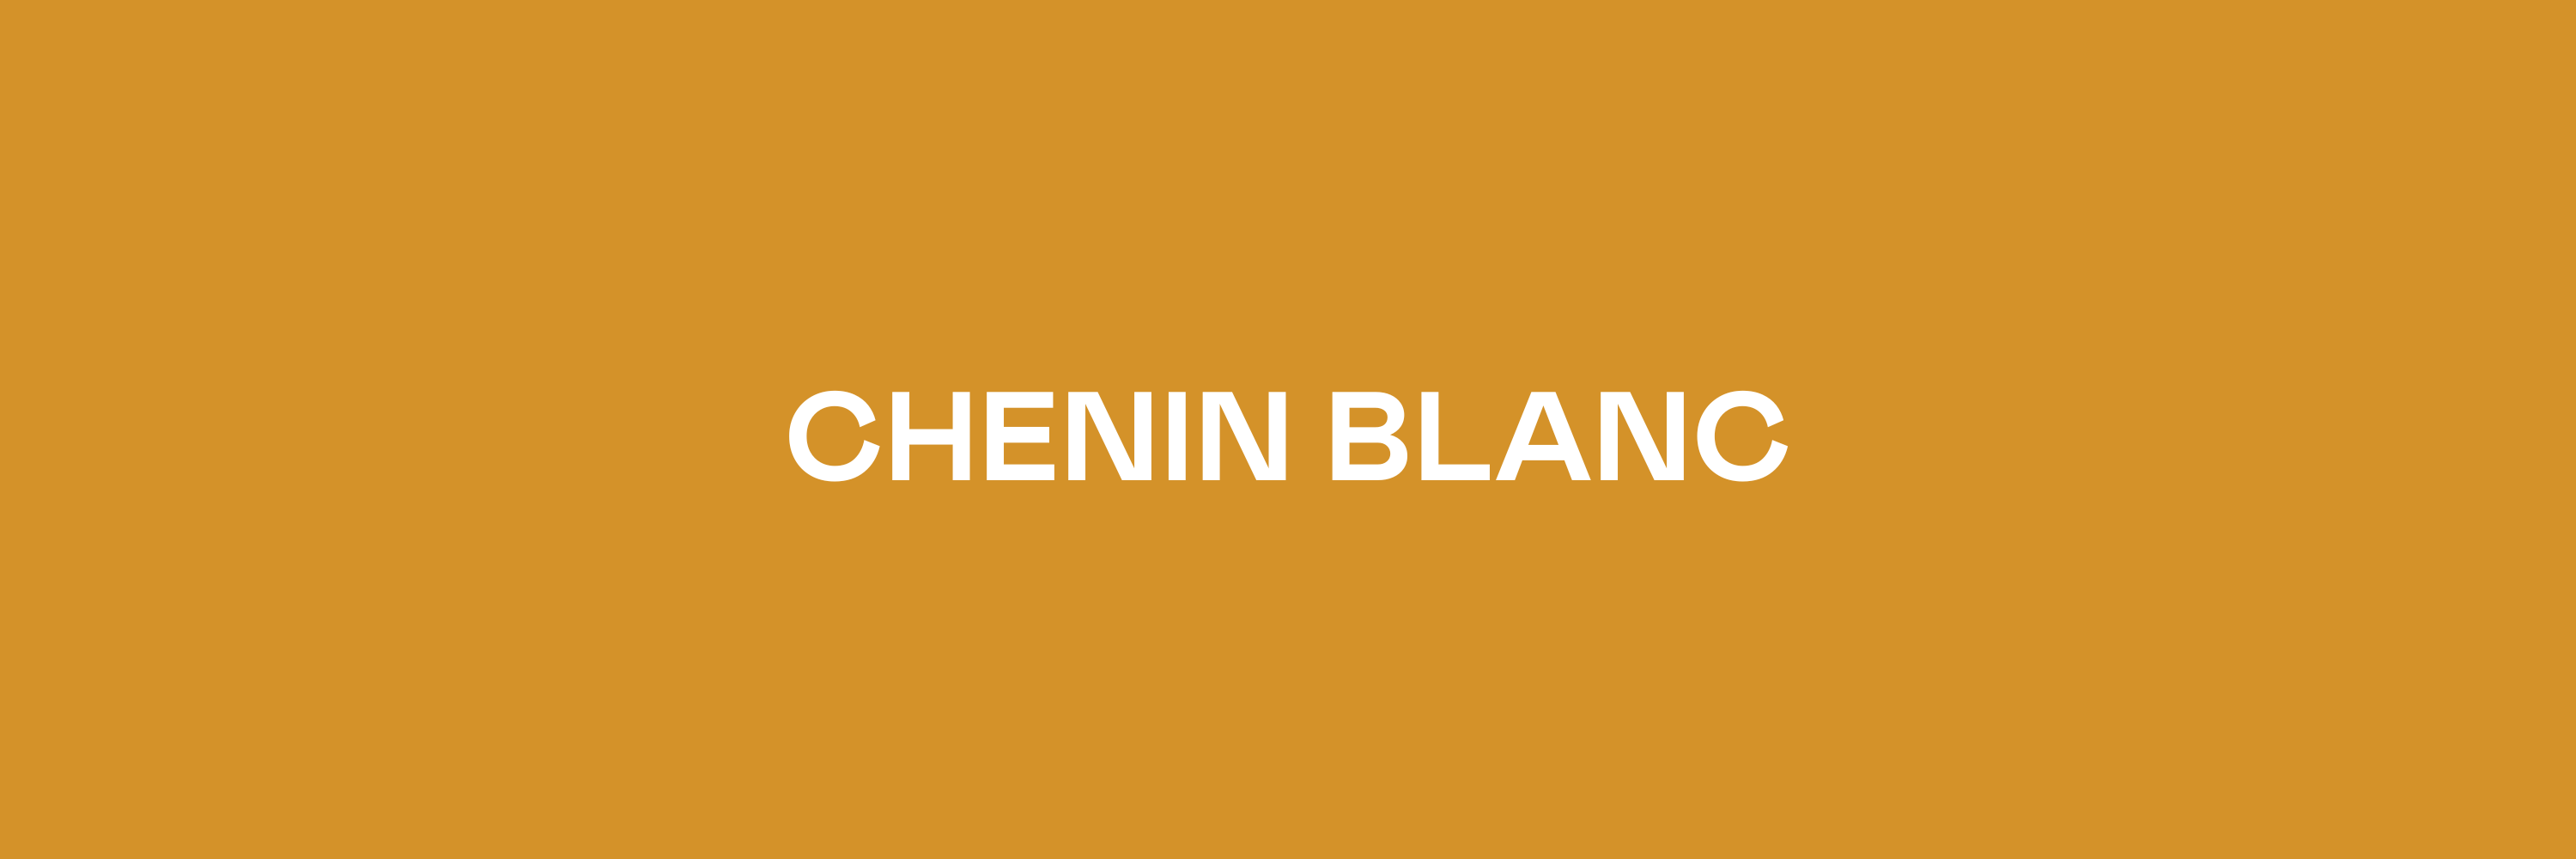 Why You Should Drink More Chenin Blanc